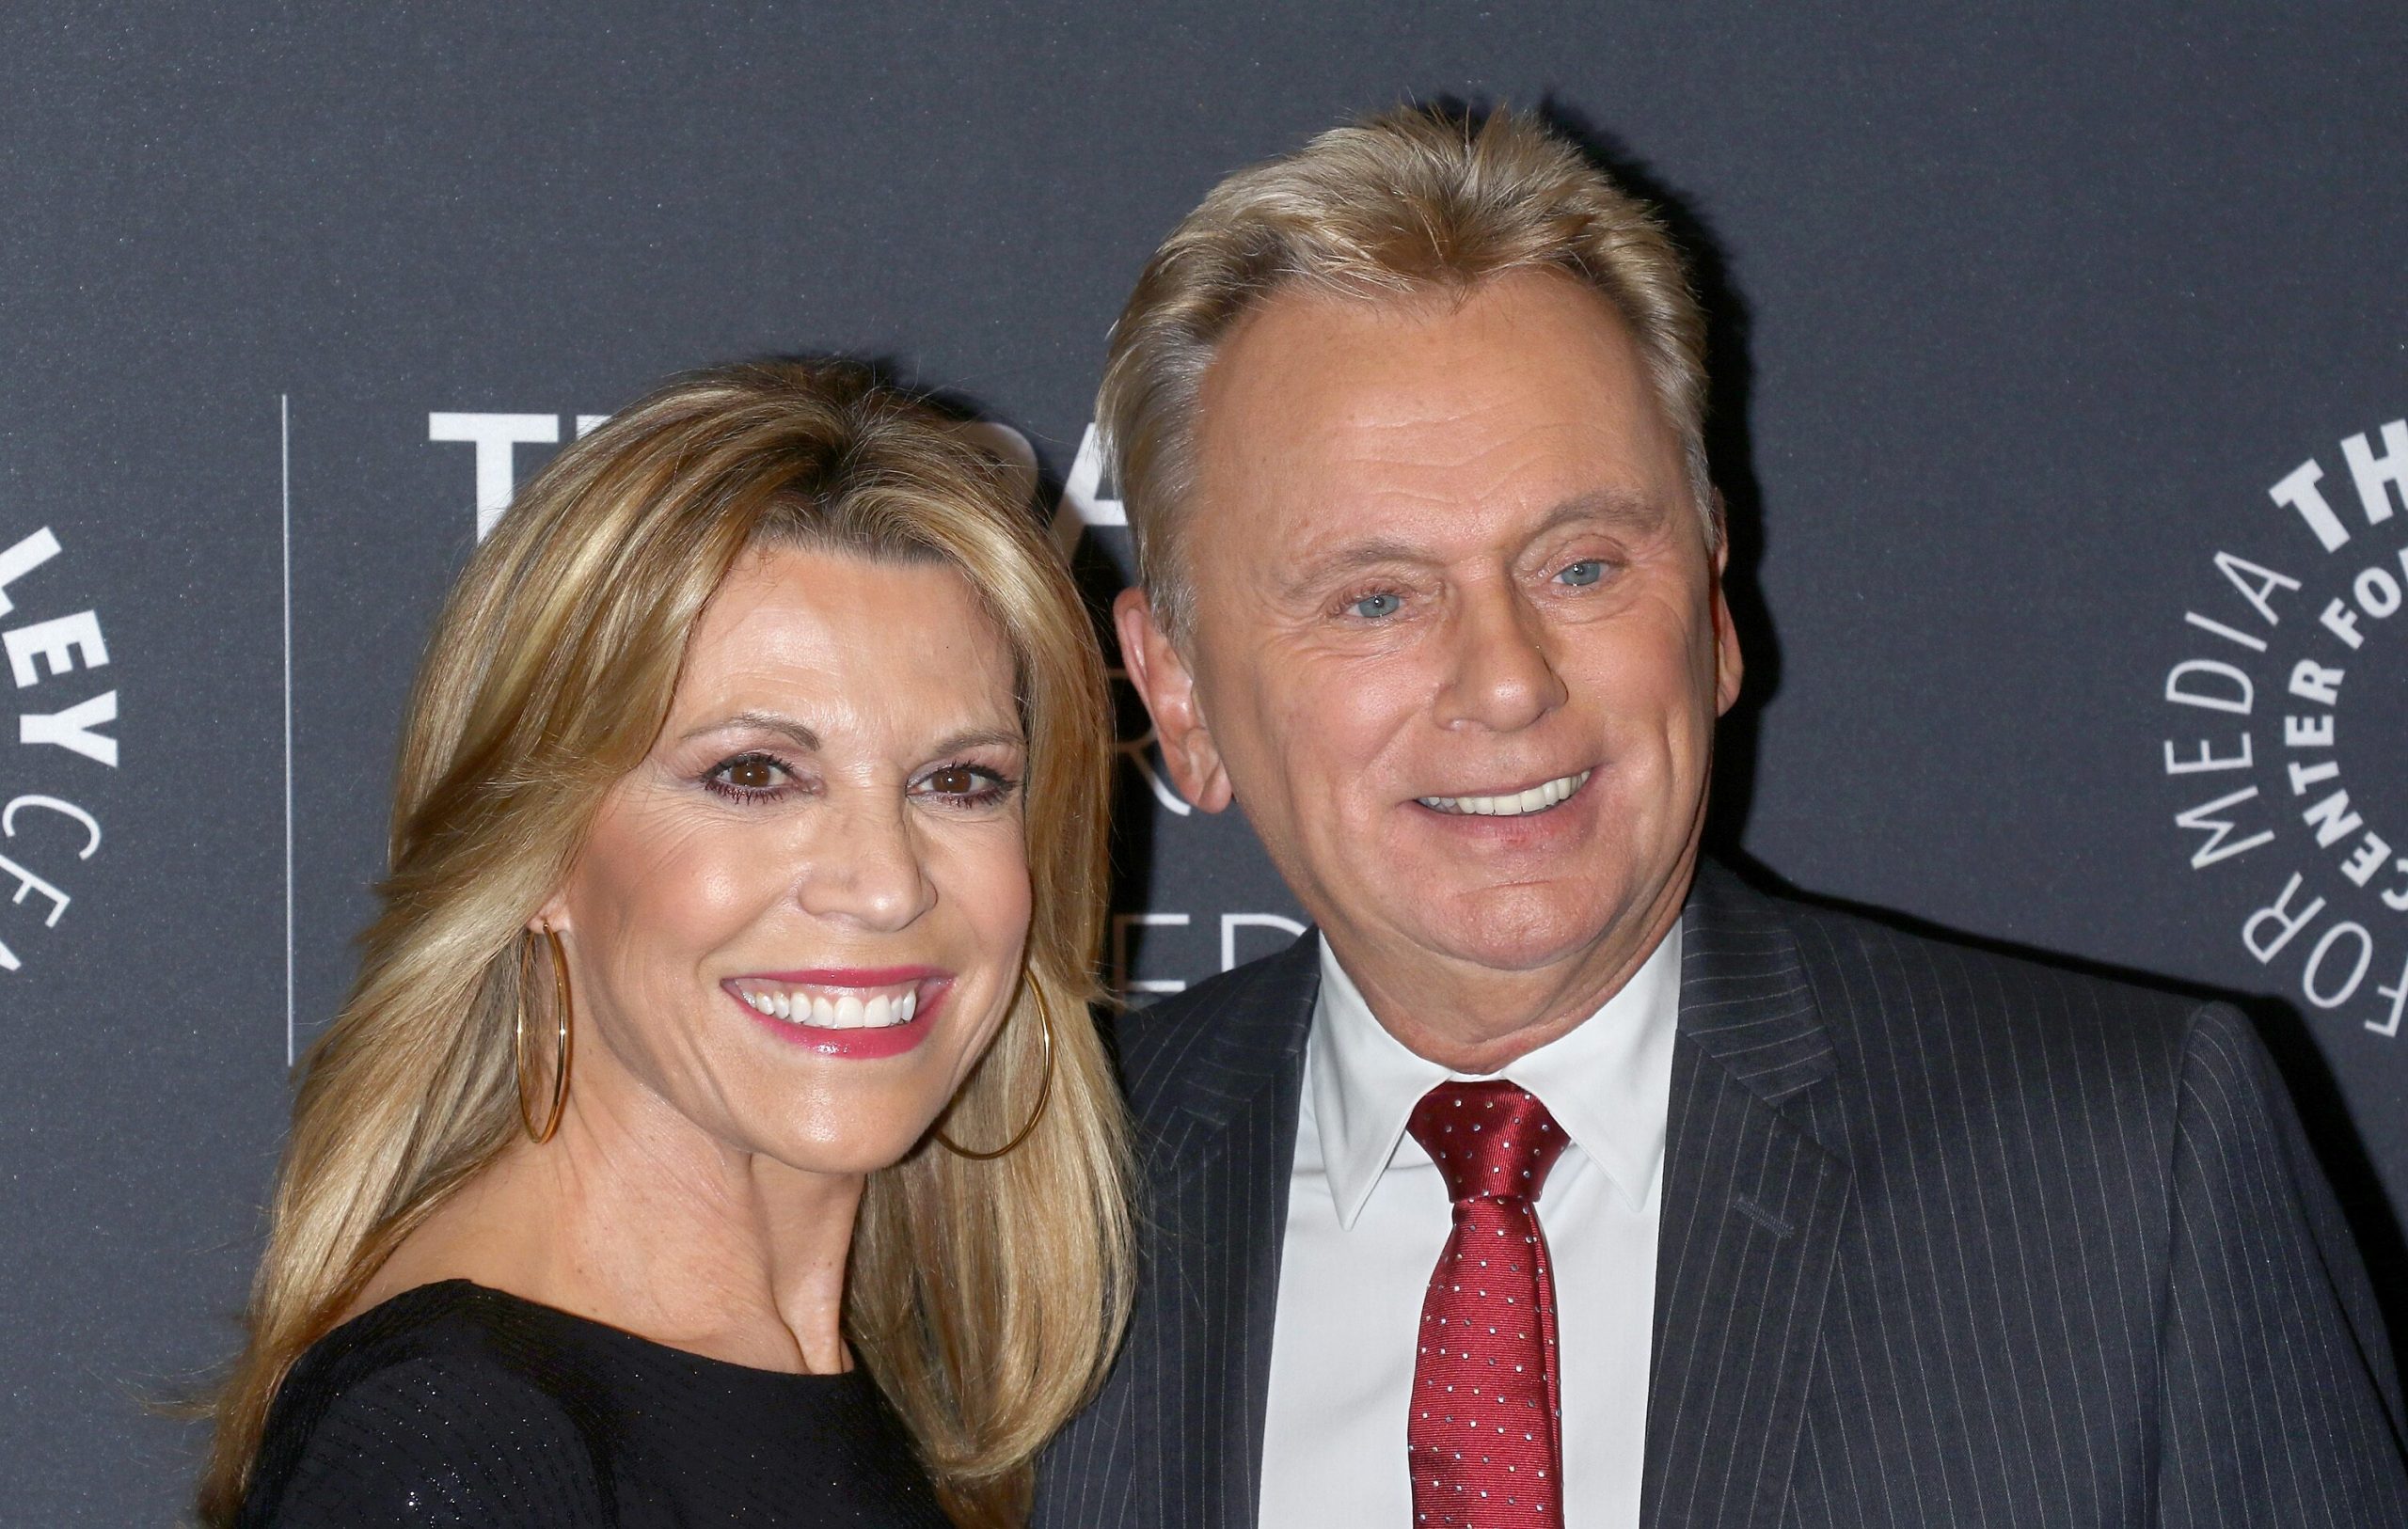 ‘Celebrity Wheel of Fortune’ appears on ABC with Pat Sajak and Vanna White as co-hosts